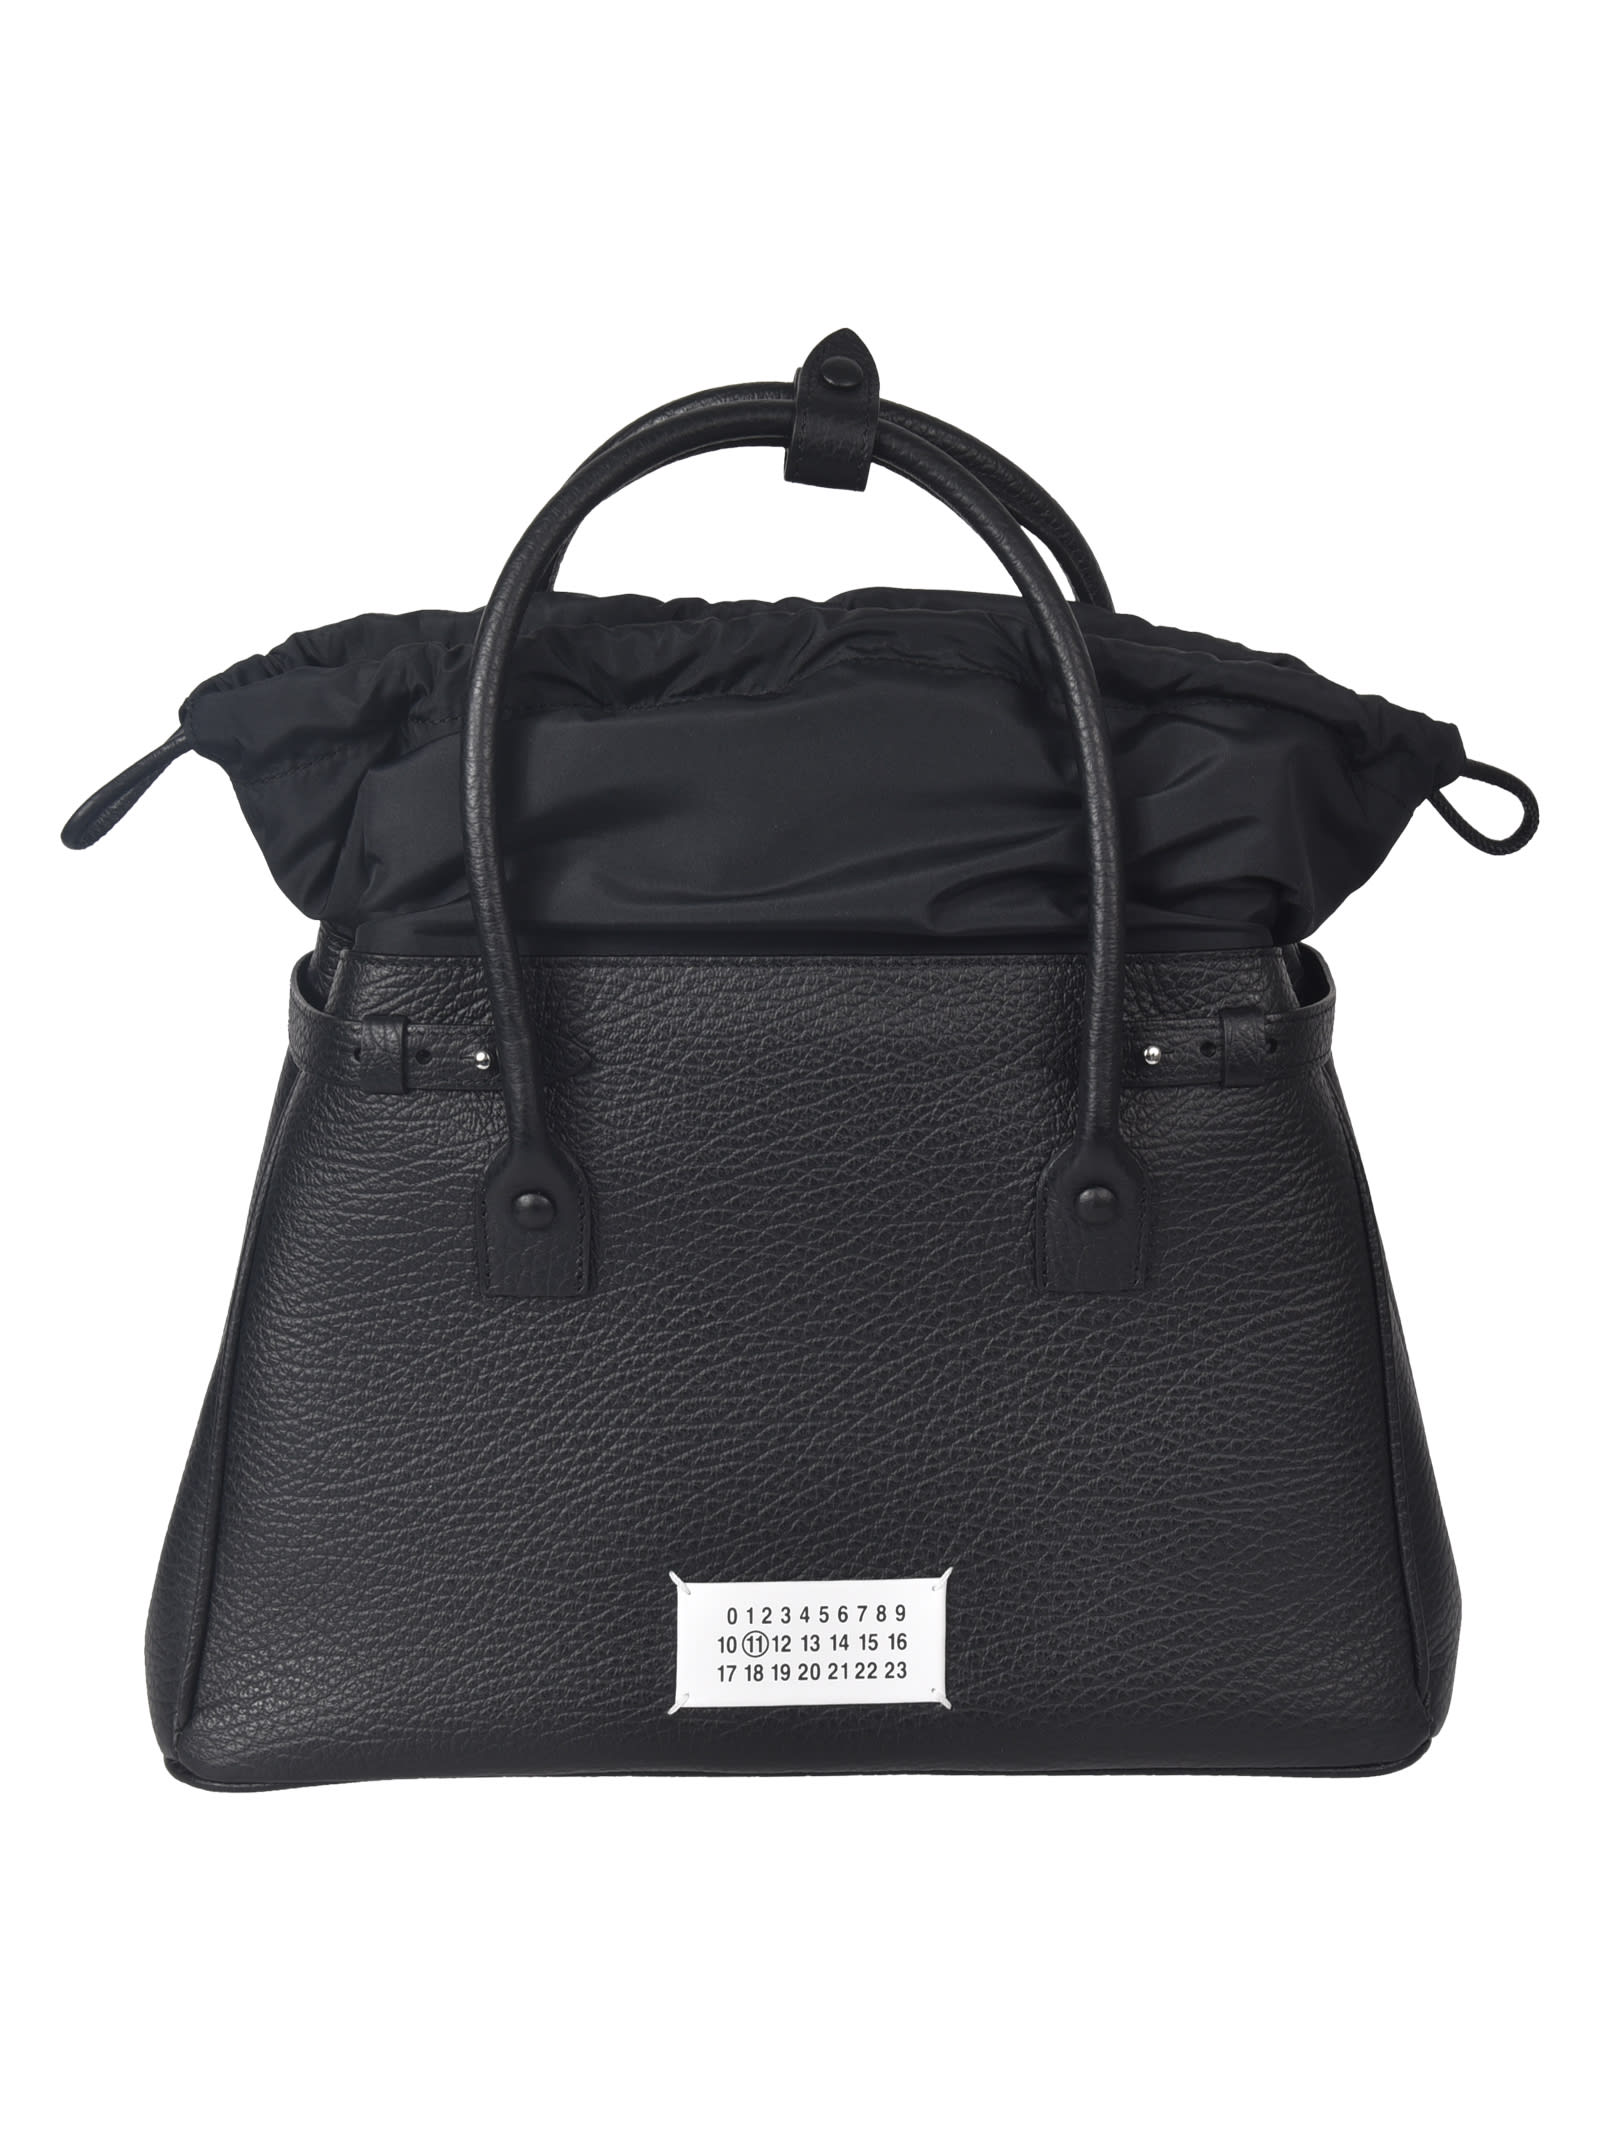 Maison Margiela Logo Patched Grained Leather Tote